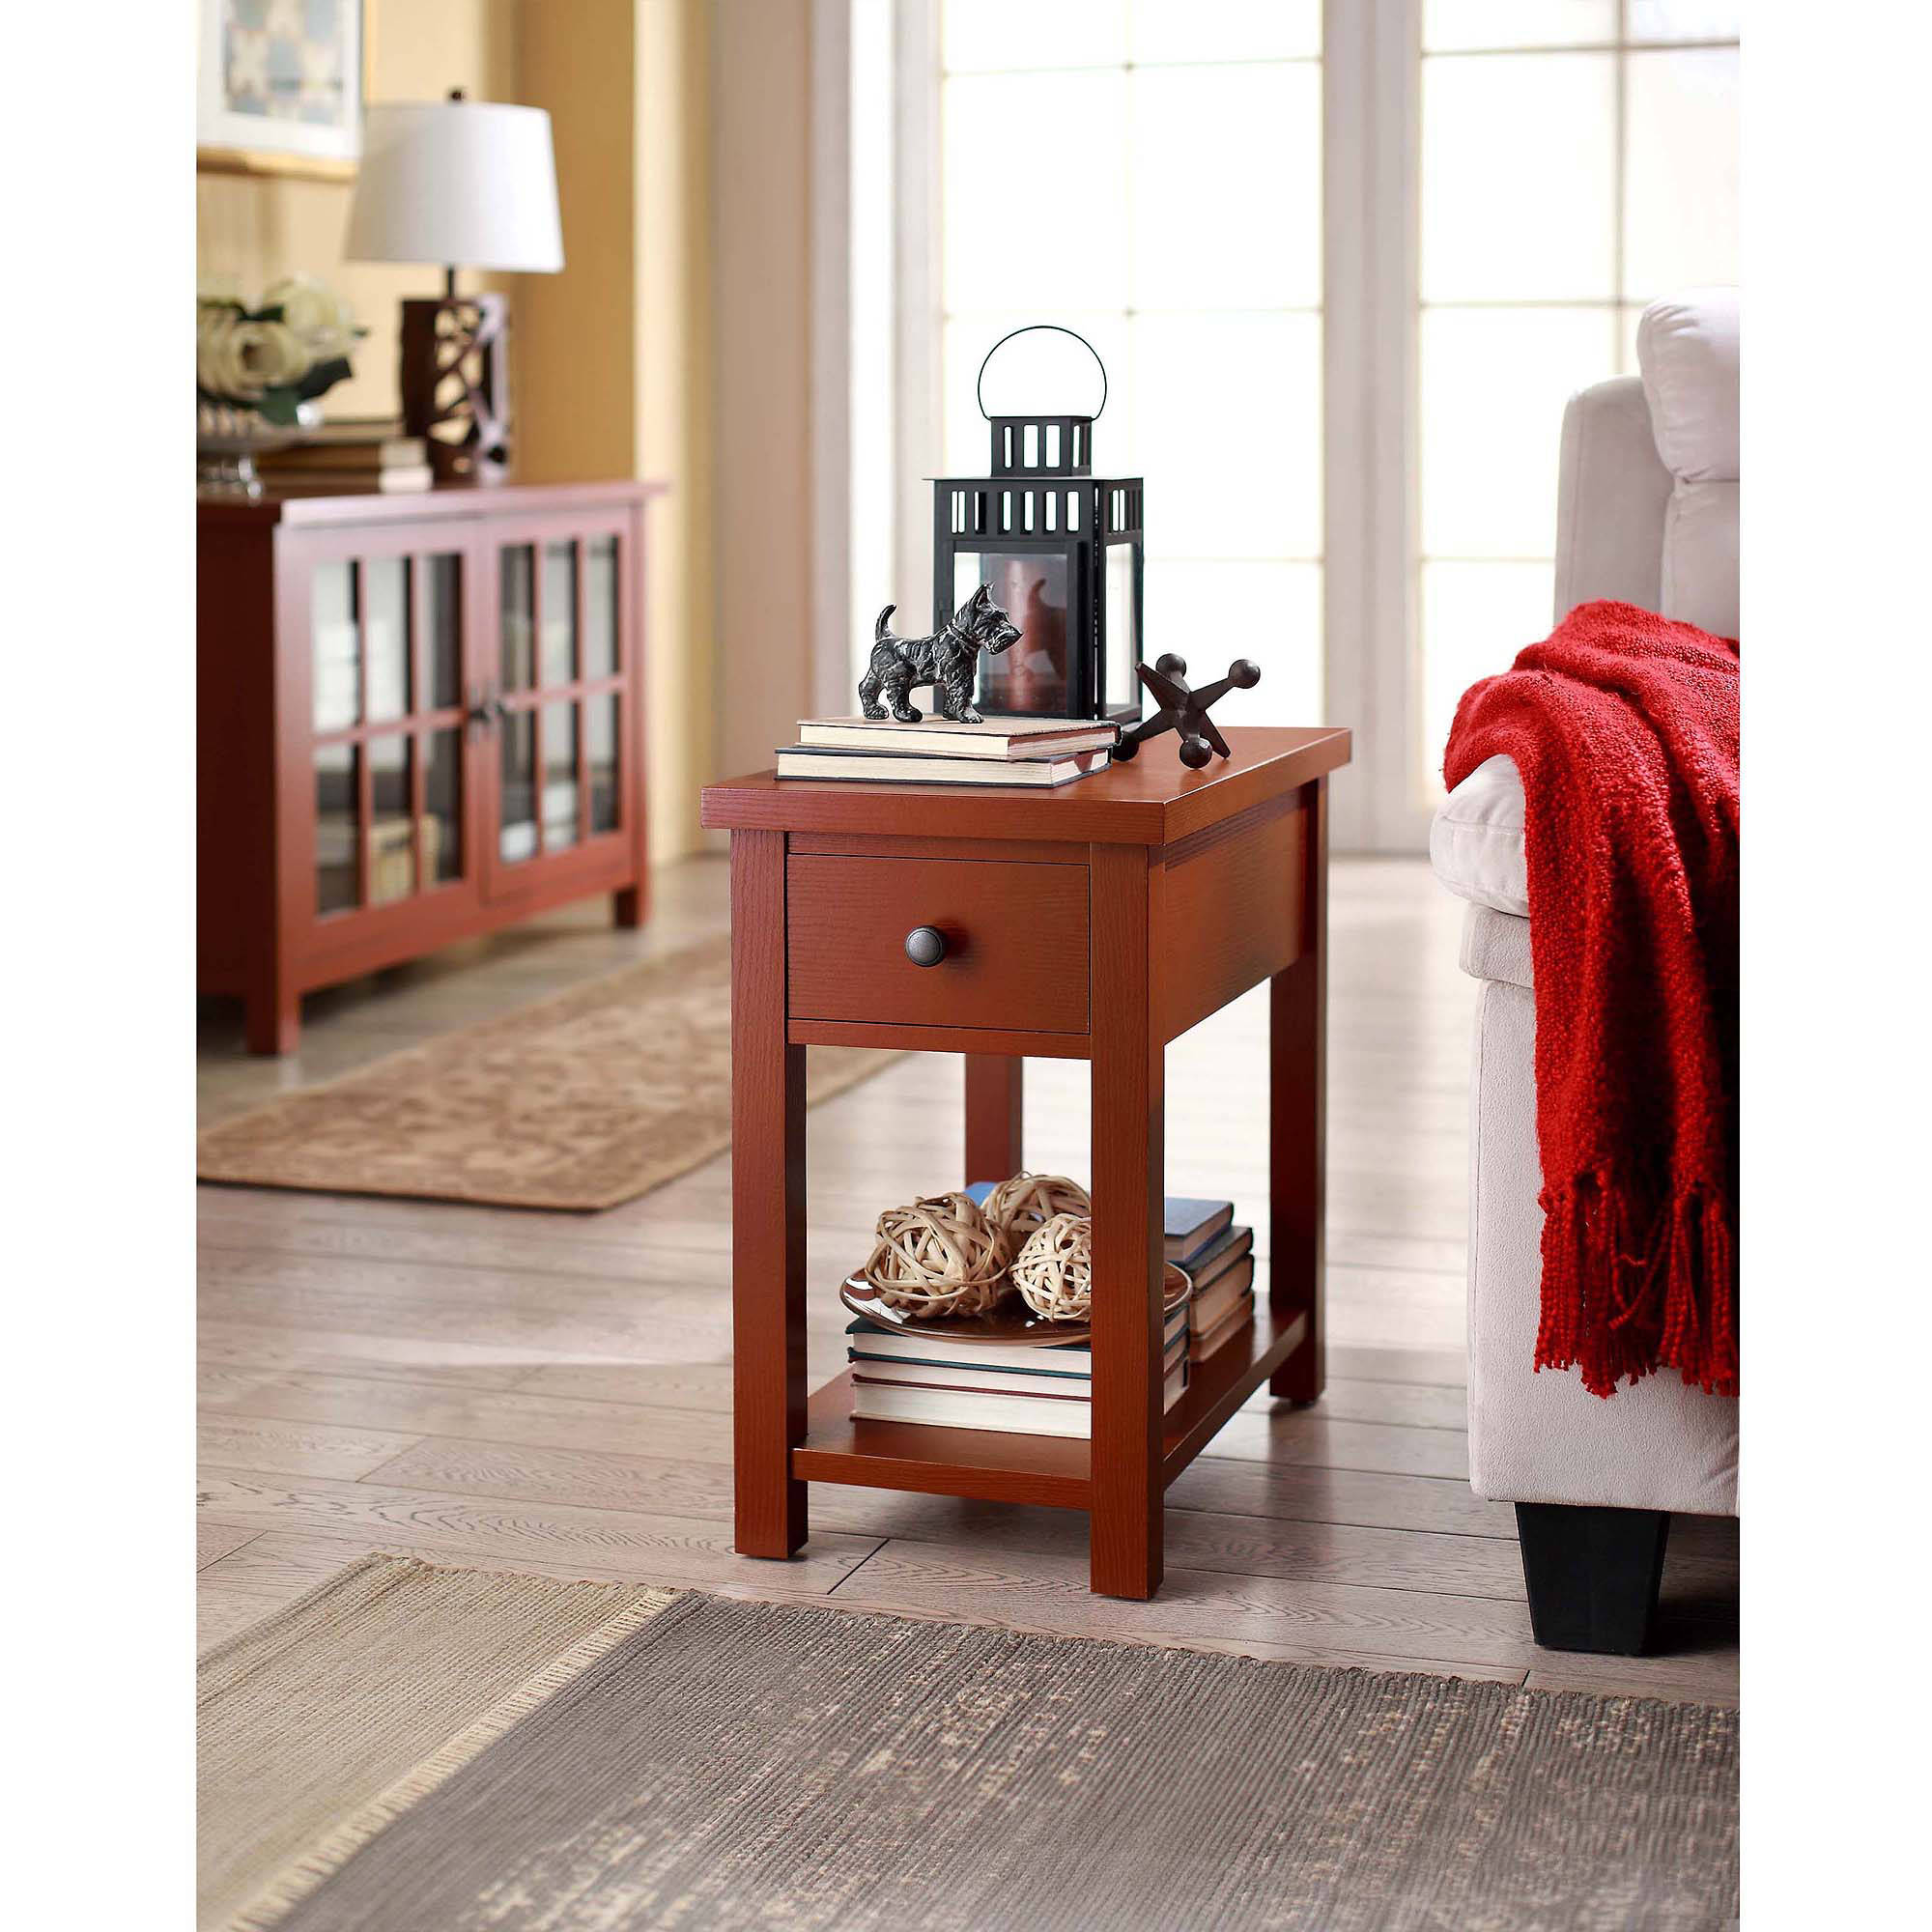 Better Homes & Gardens Oxford Square End Table with Drawer, Solid Wood, Multiple Finishes - image 1 of 5